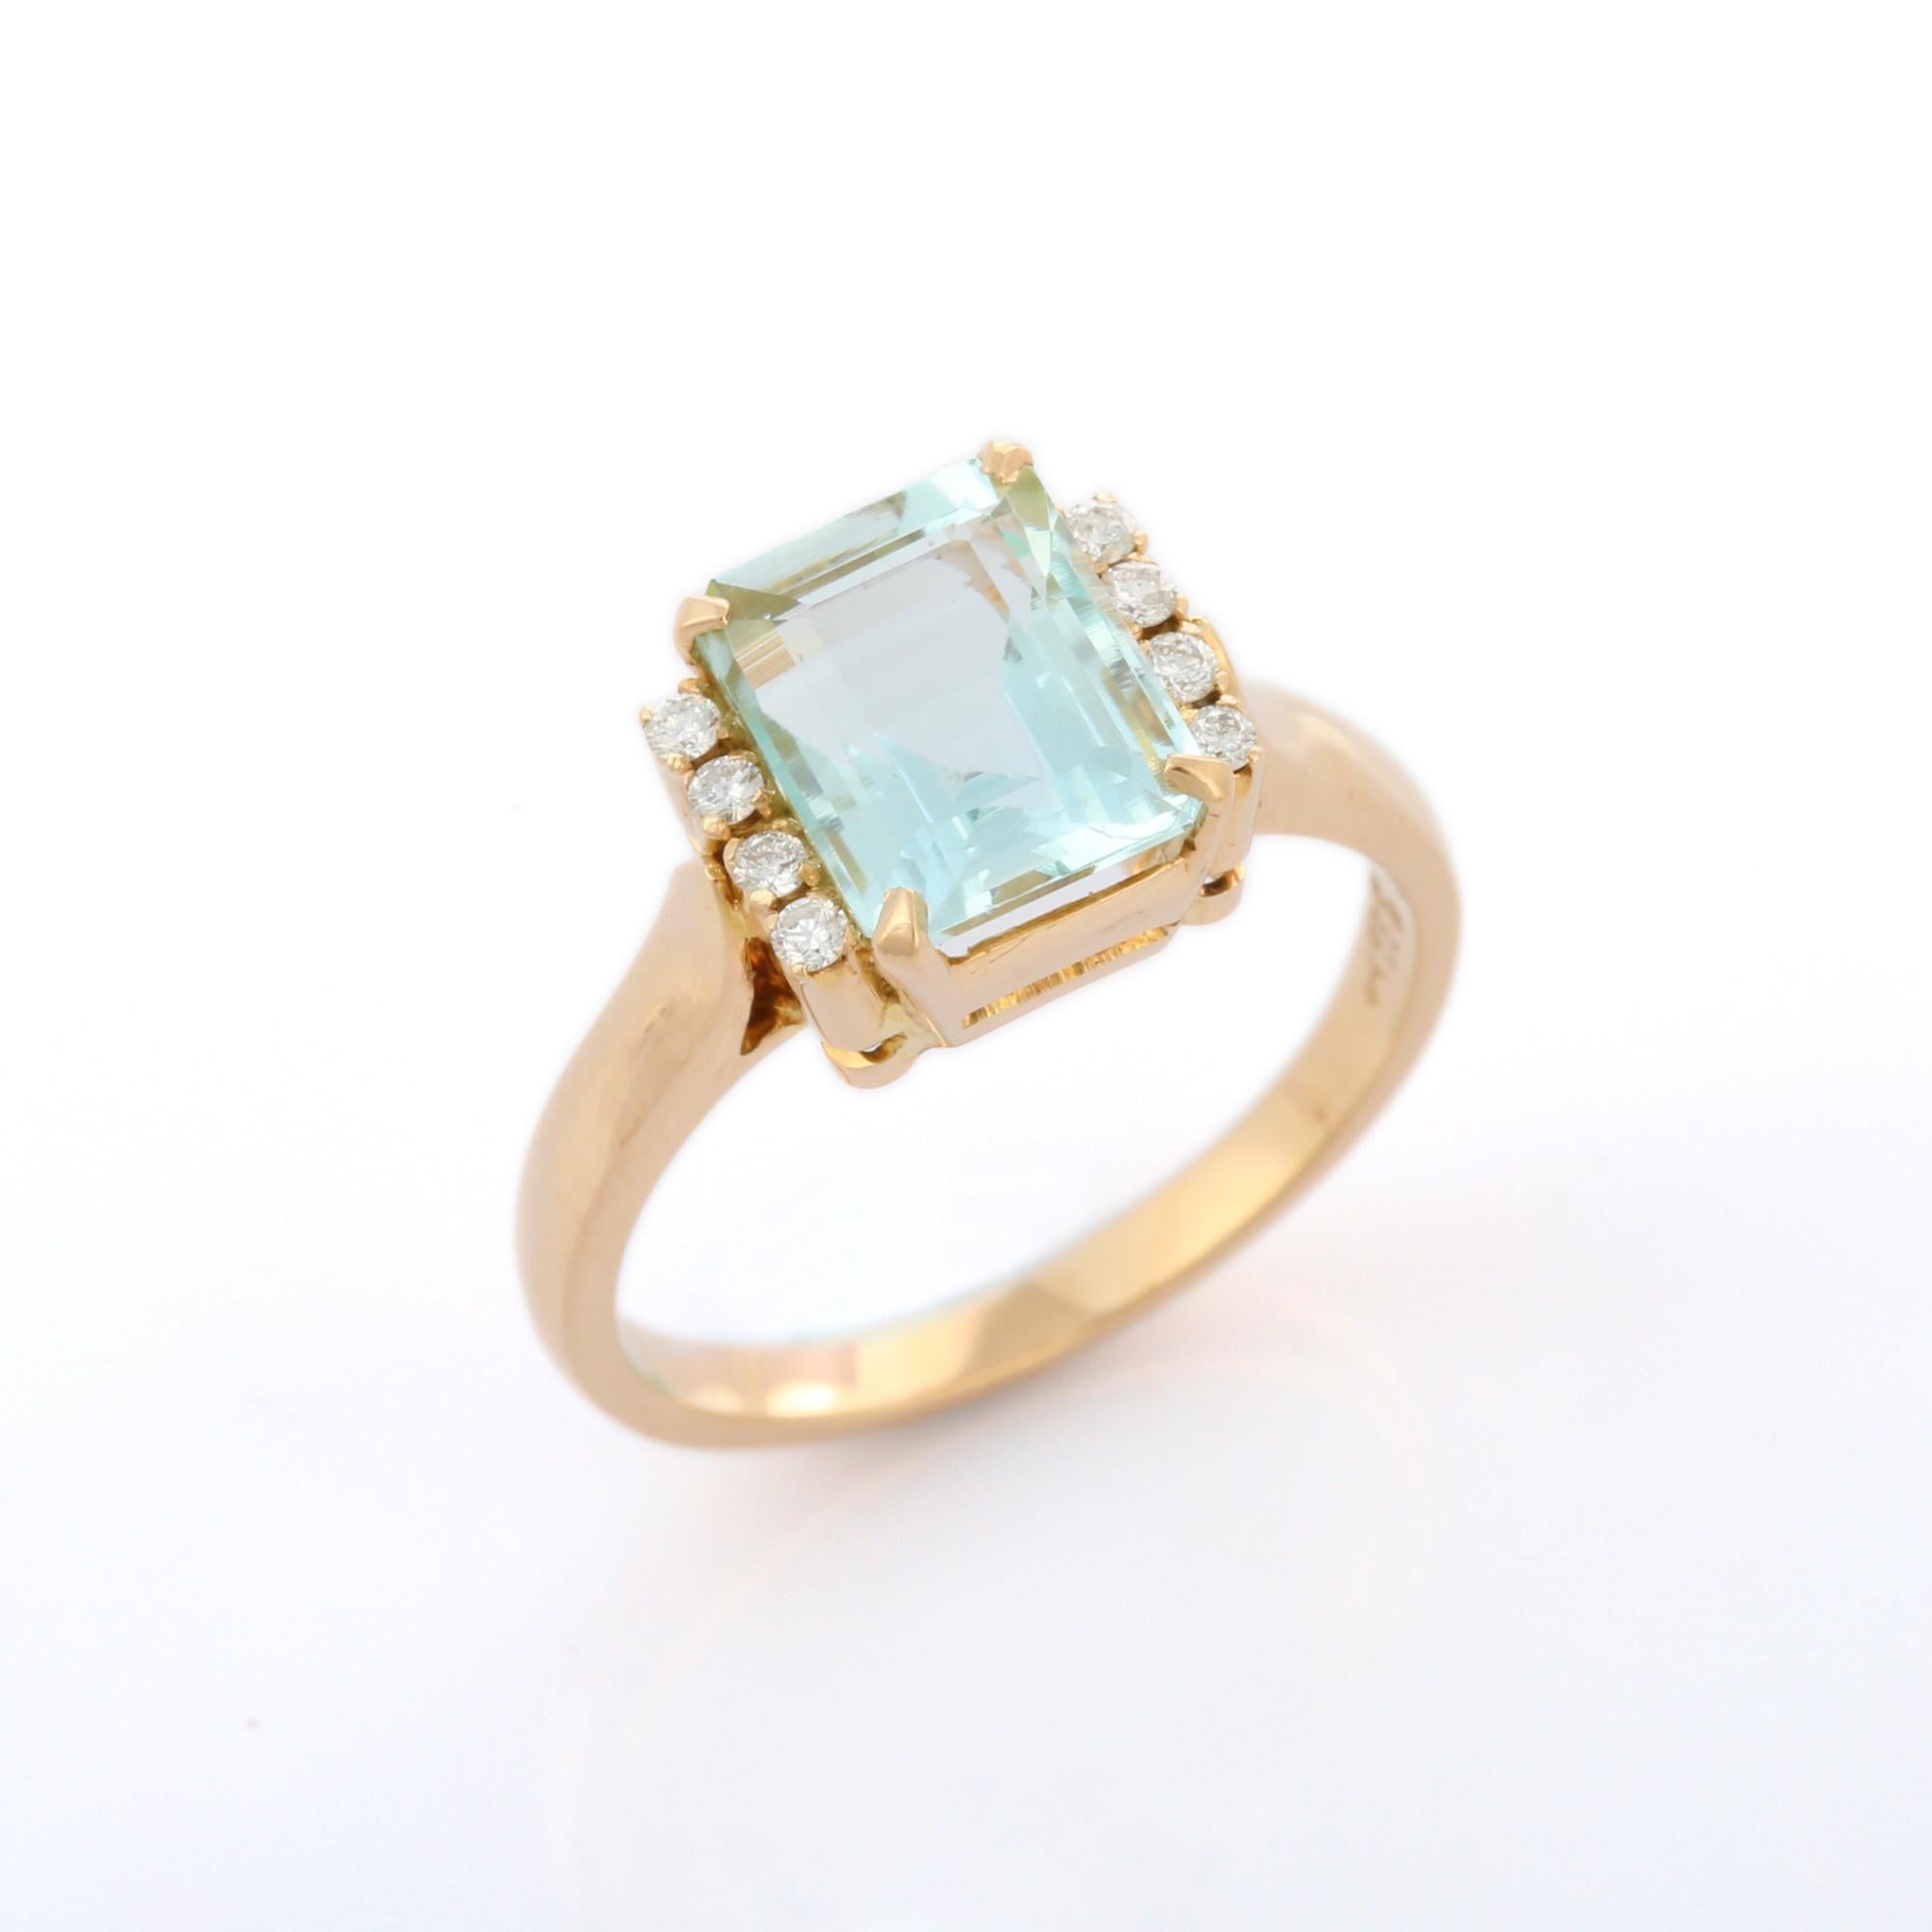 For Sale:  Octagon Cut 2.65 ct Aquamarine Cocktail Ring in 18K Yellow Gold with Diamonds  8